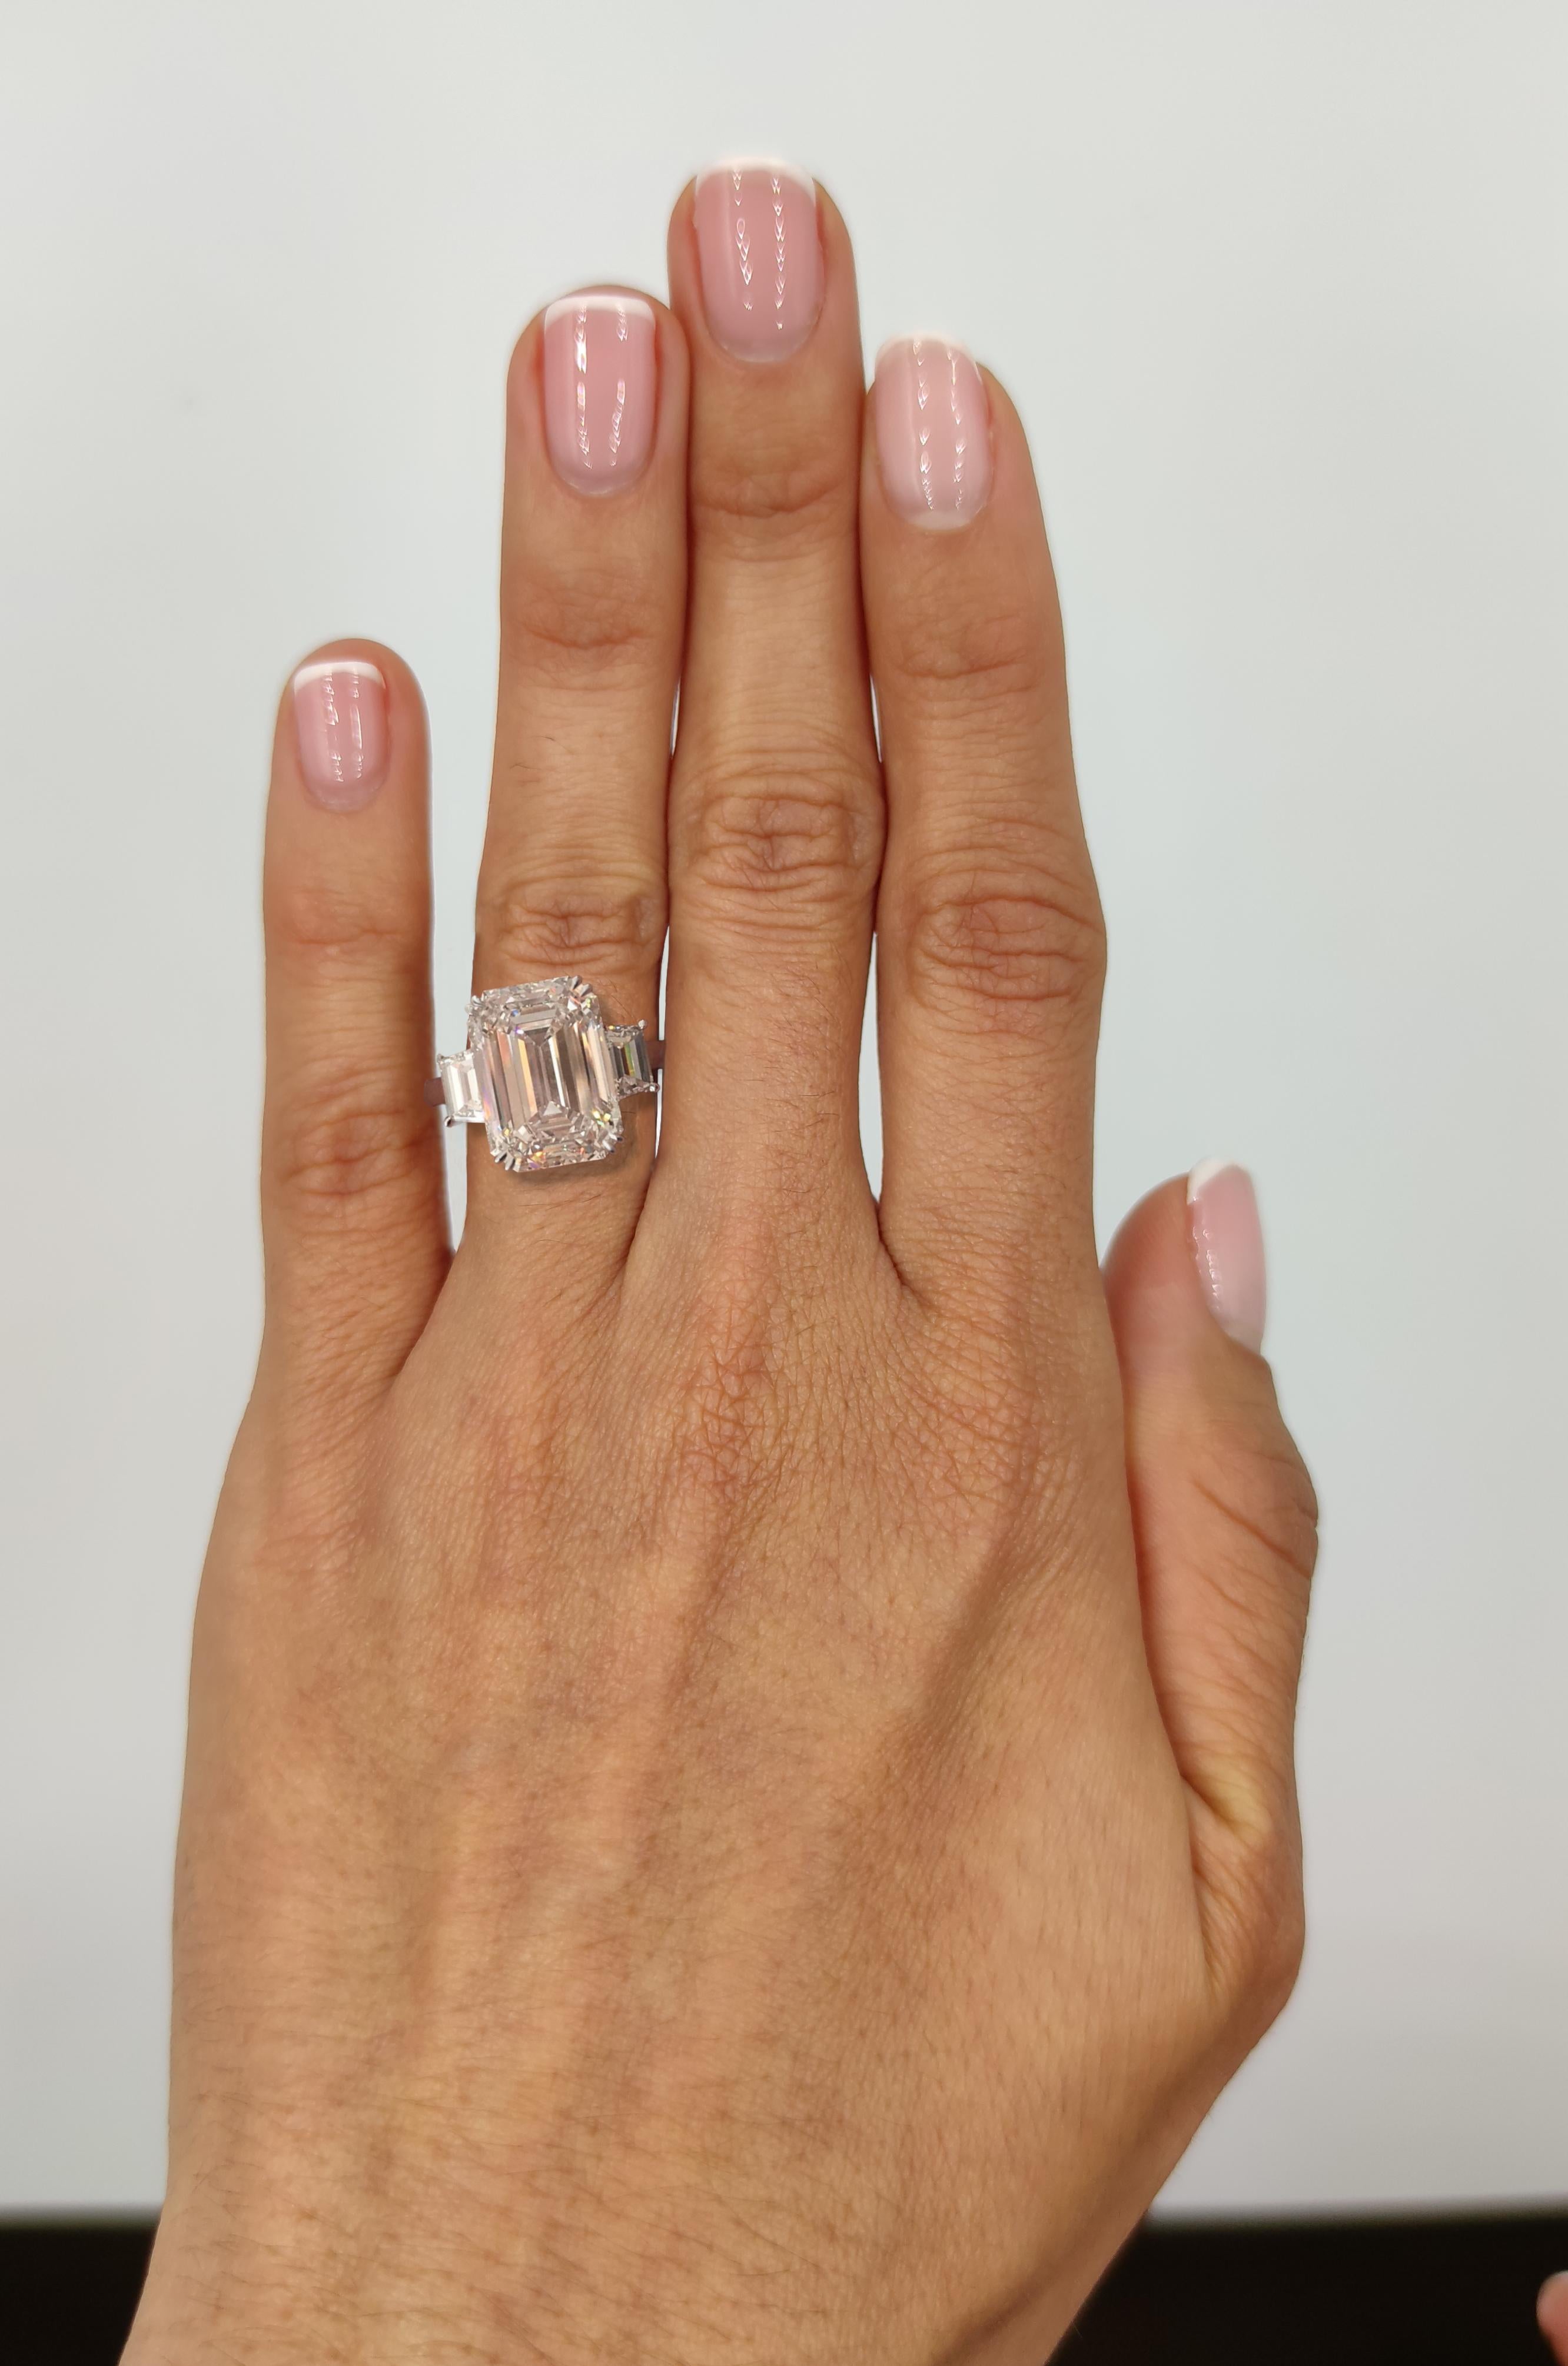 Antinori Fine Jewels is proud to offer this important and impressive  Emerald cut diamond ring. 

The ring consists of one emerald cut diamond weighing 4 carat. The 4 carat center emerald cut is accented by two trapezoid diamonds having a total